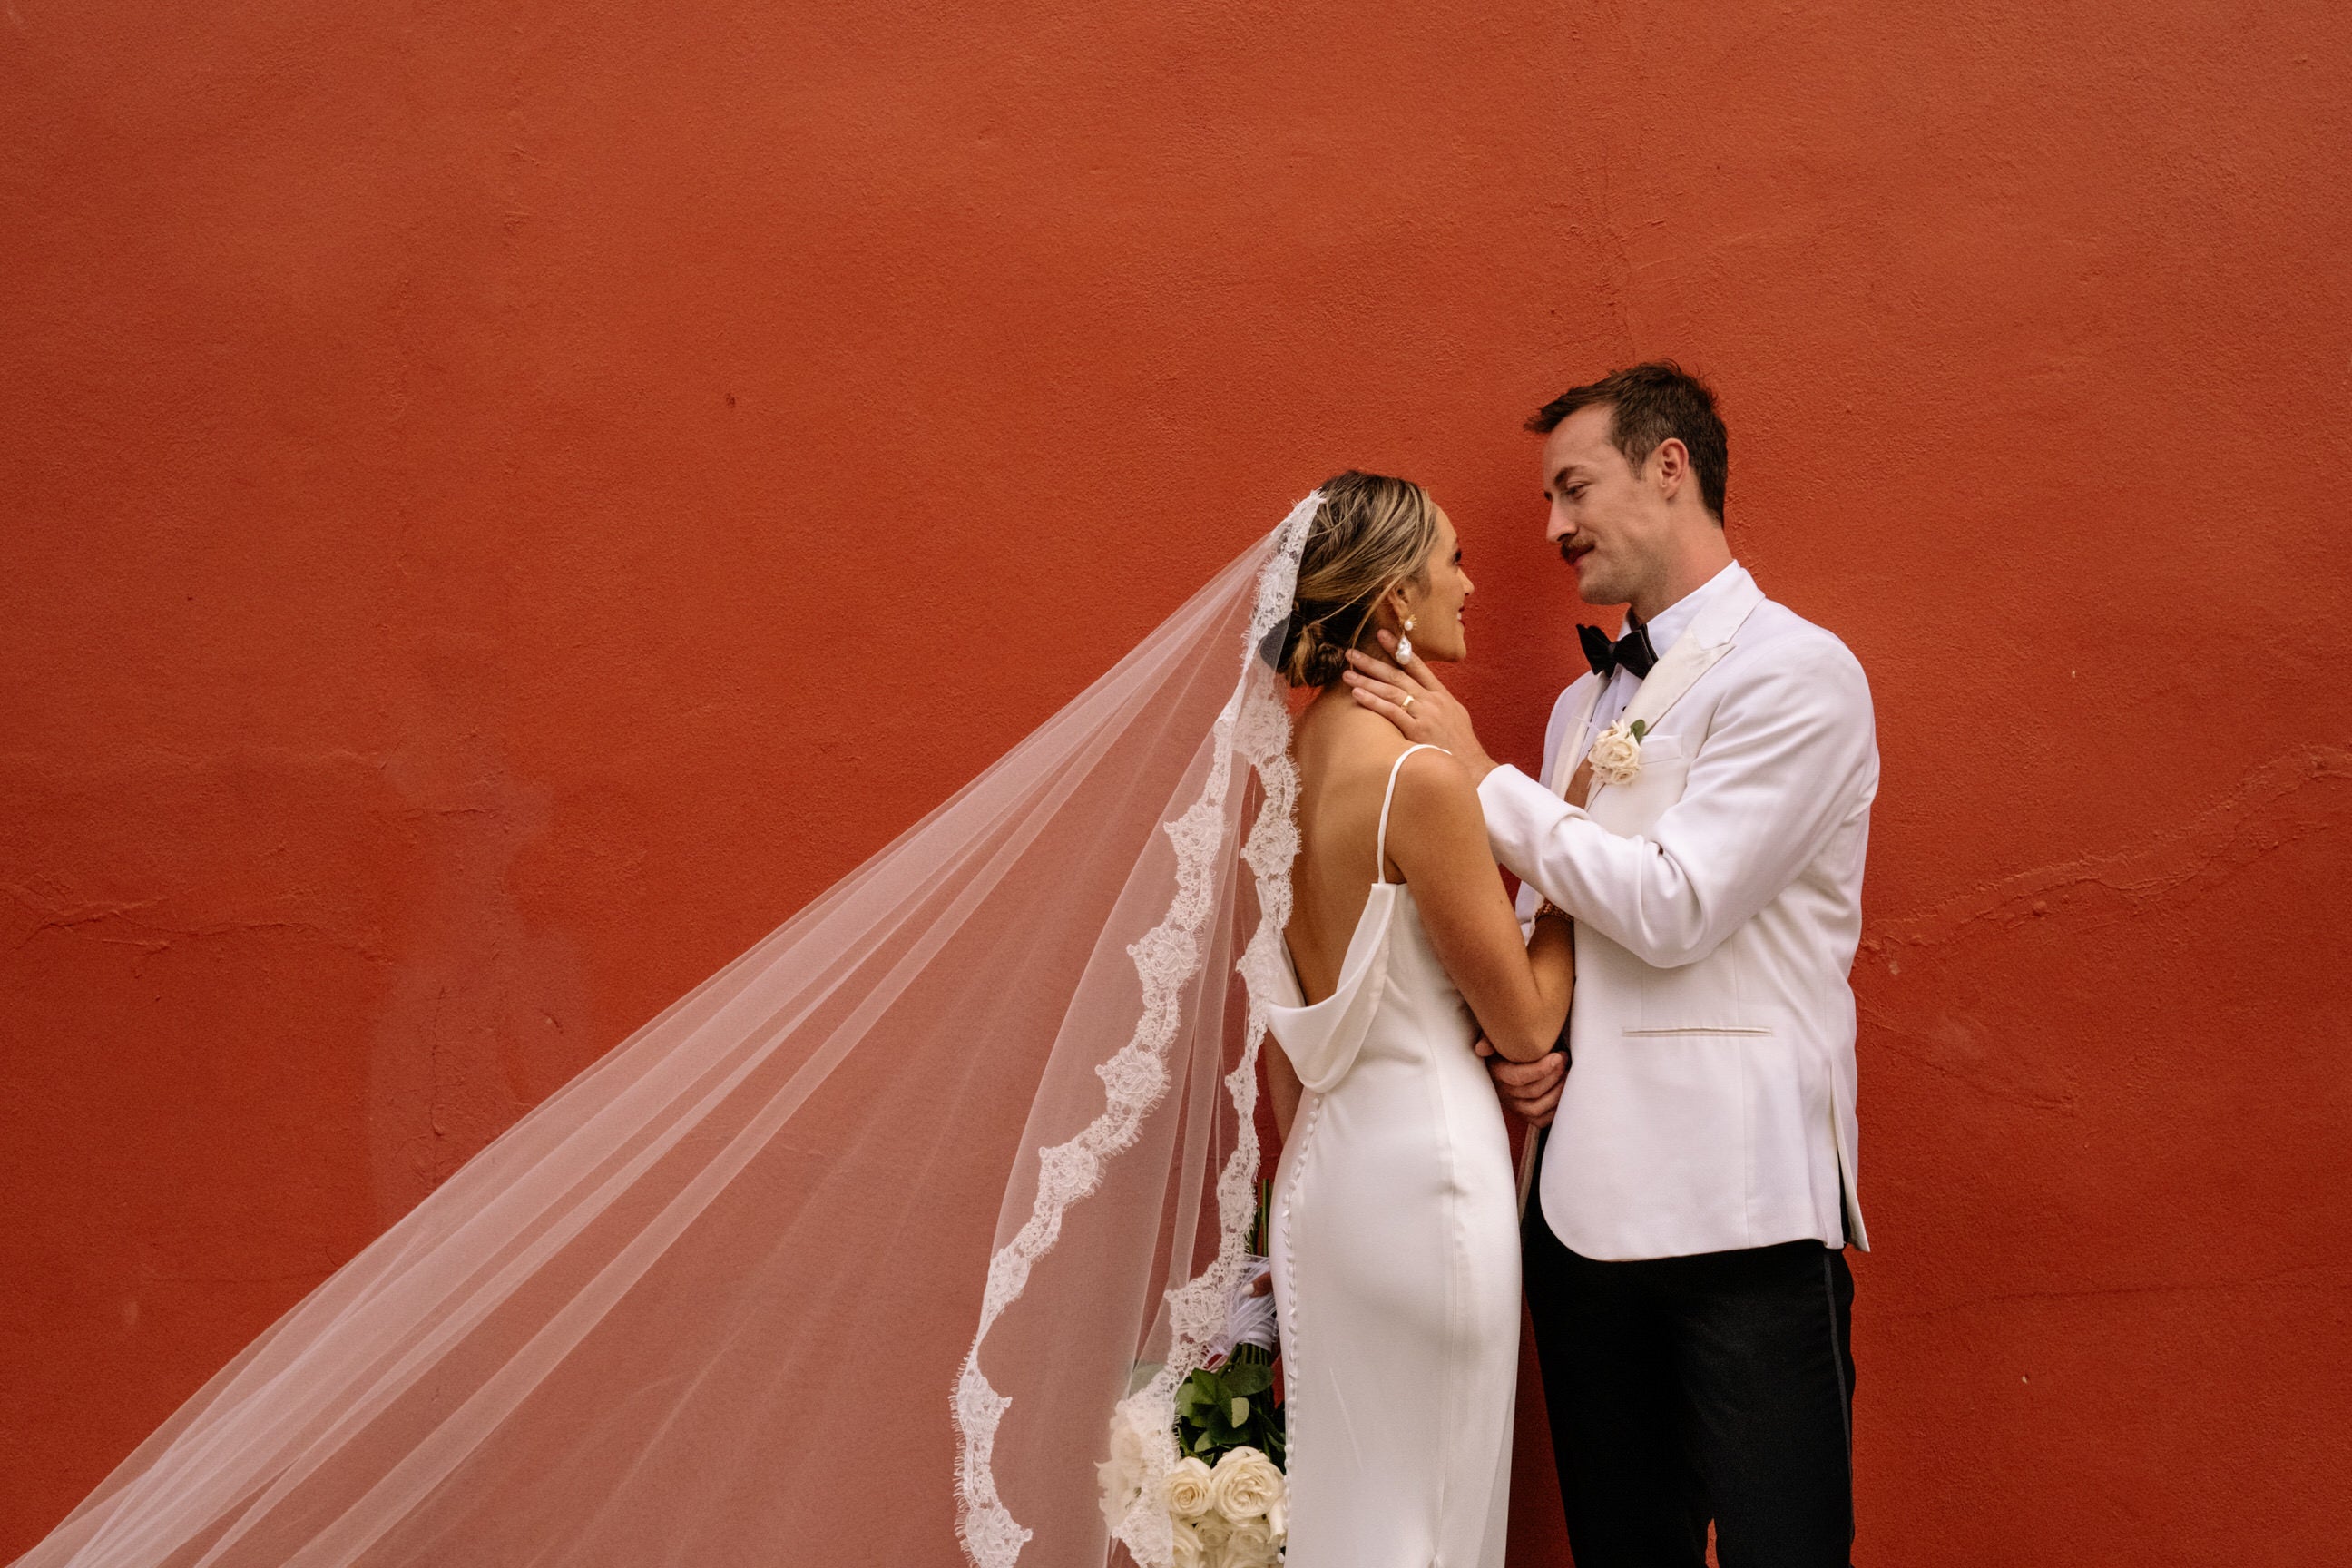 Wedding Veil: How to Choose One to Compliment Your Bridal Gown Style